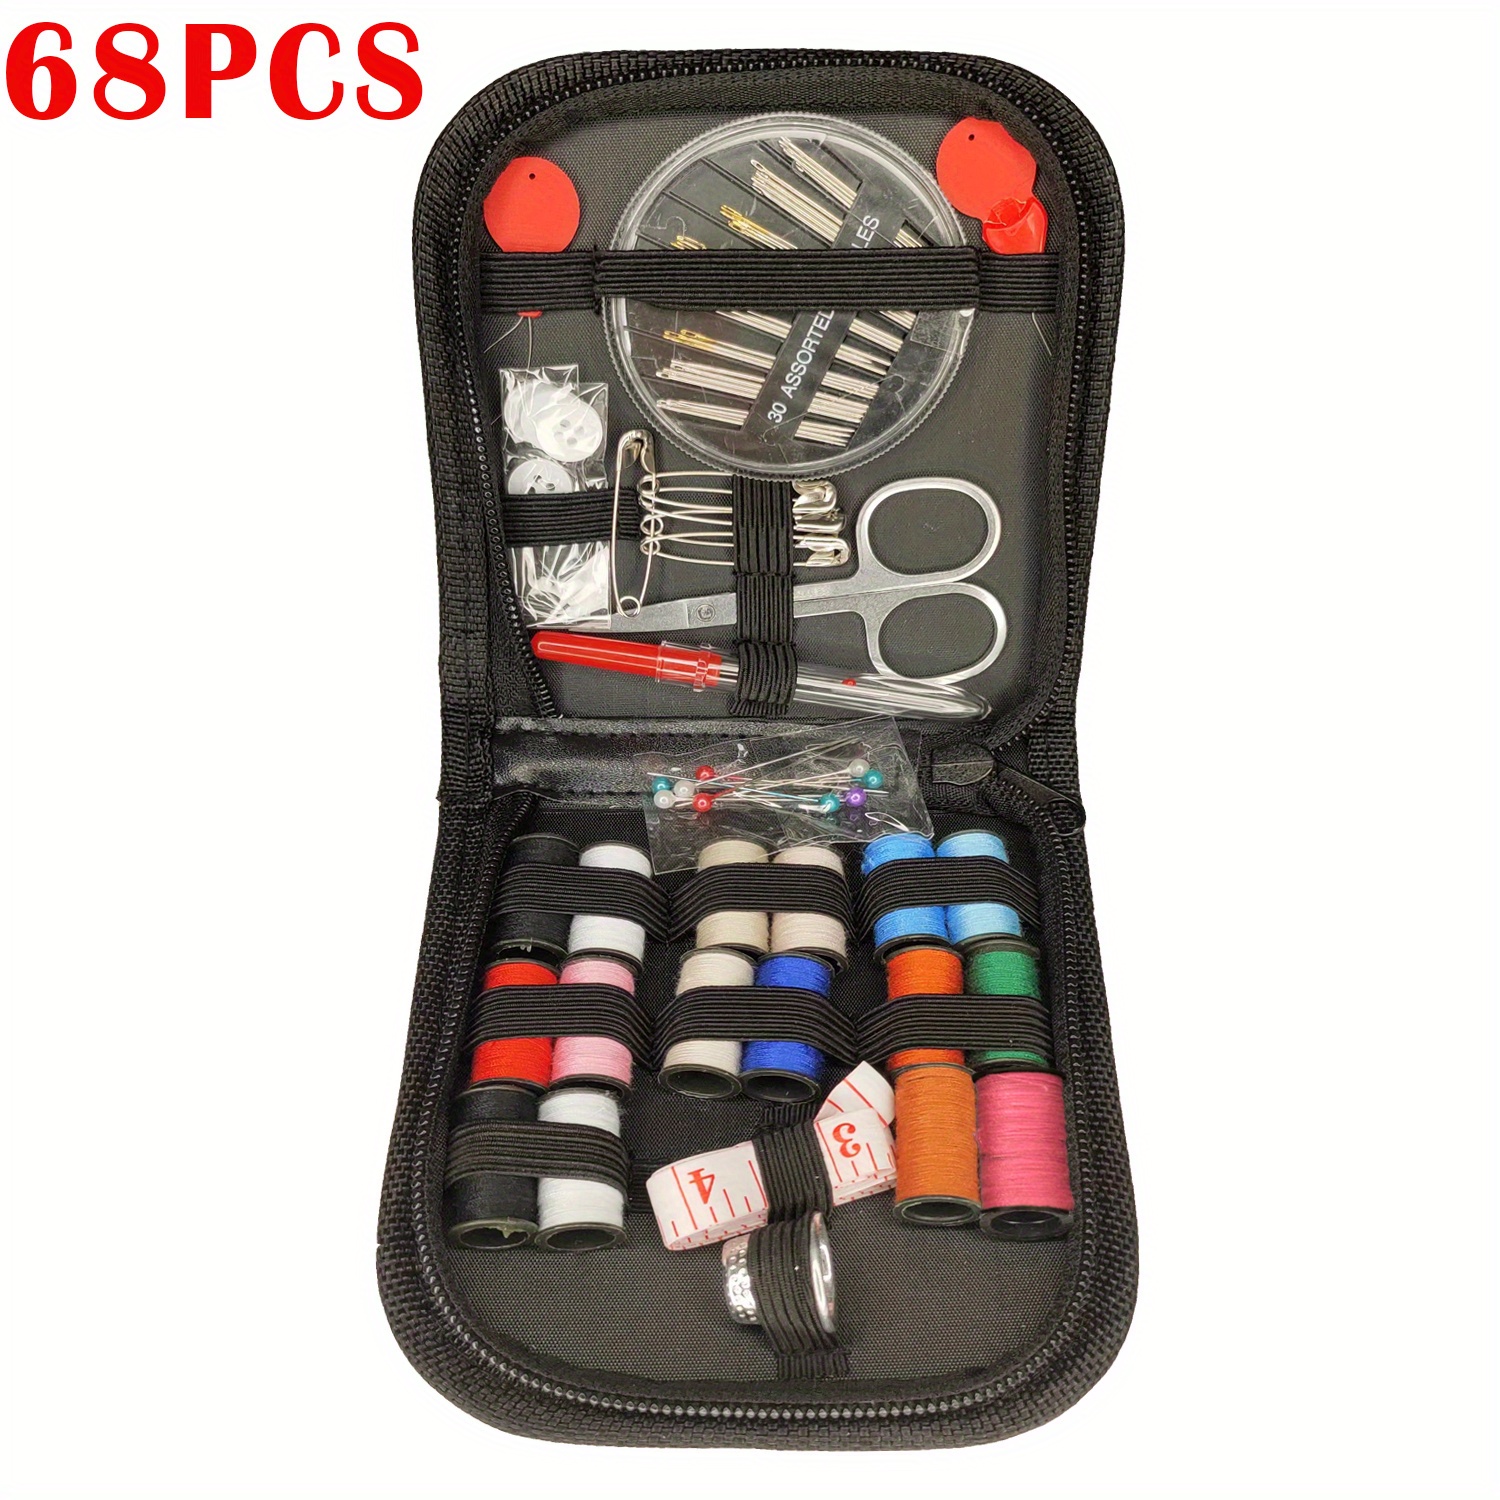 Sewing Kit for Adults and Kids - Multicolor Thread, Needles, Scissors,  Thimble - Emergency Repair and Travel Kits - Sewing Accessories and Supplies  